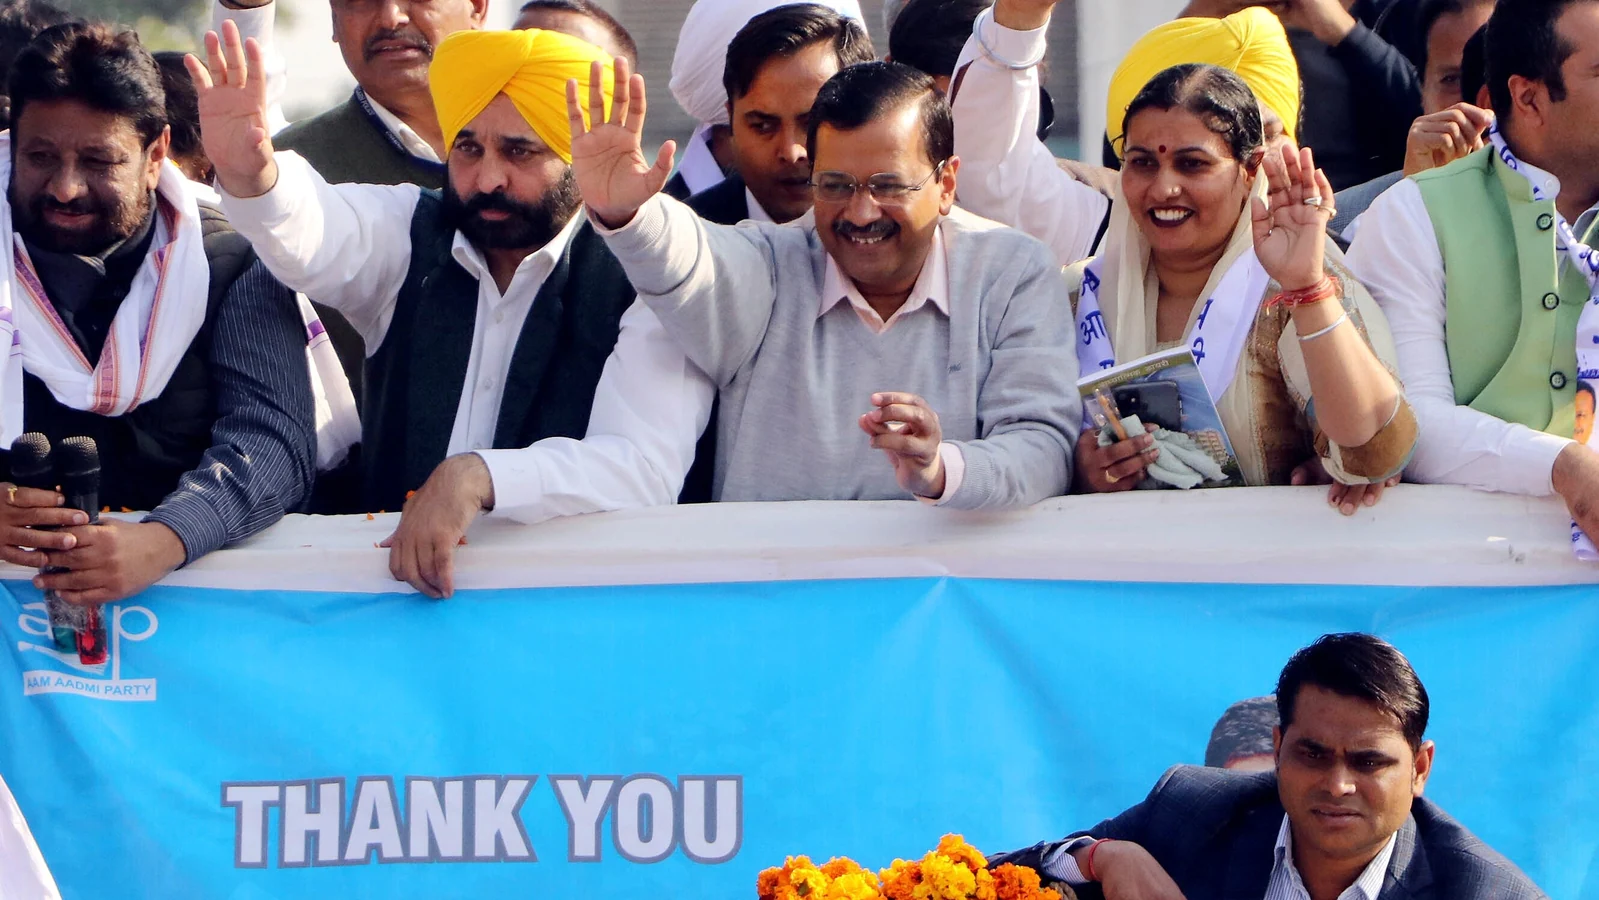 Dynamics that helped the Aam Aadmi Party form a government in Punjab